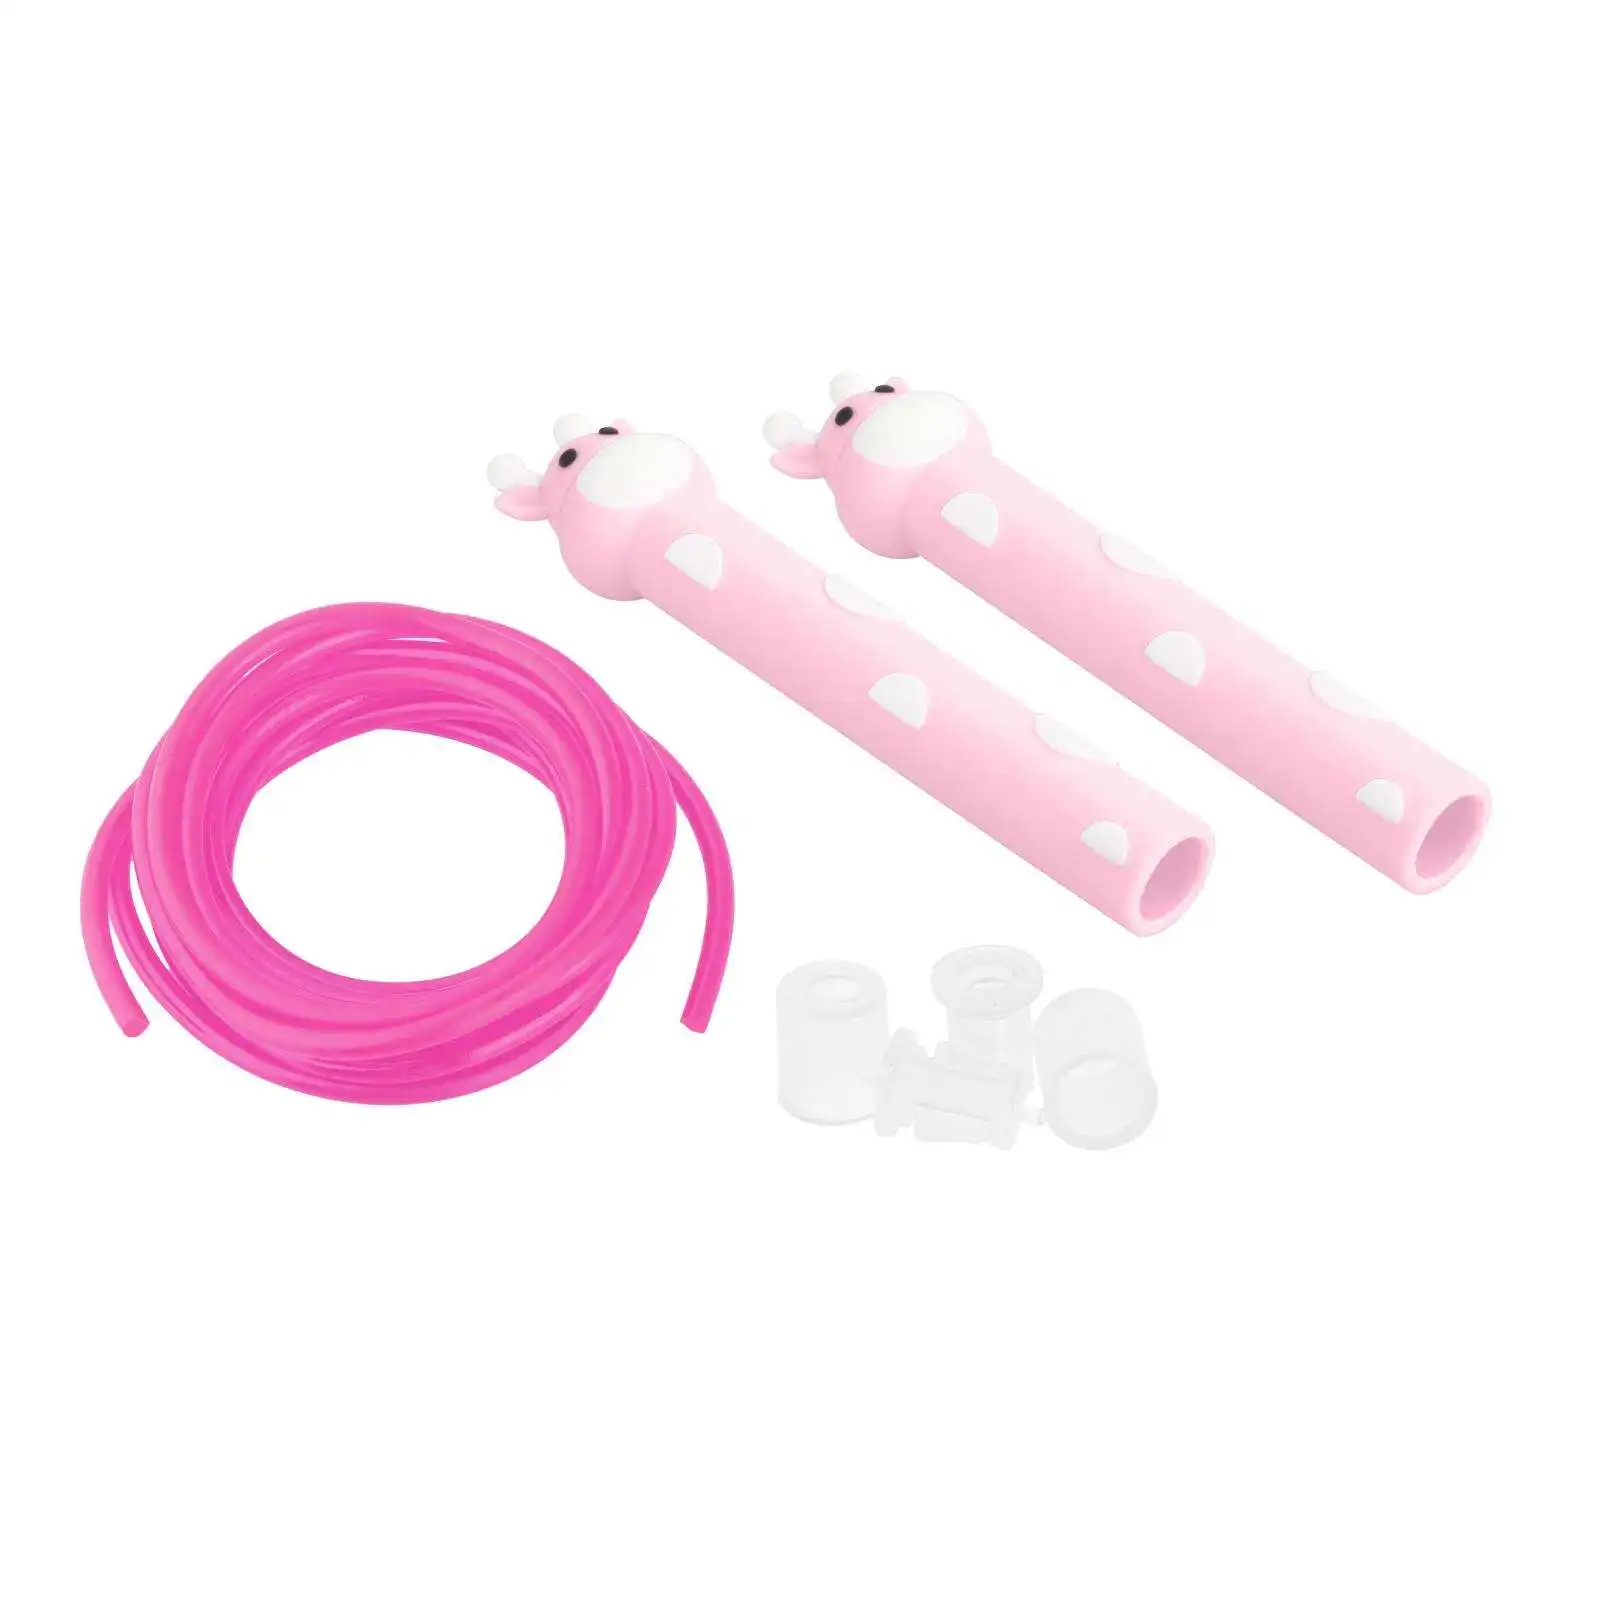 Children`s Skipping Rope Soft Cute Animal Durable Kids Jump Rope for Keeping Fit Outdoor Fun Activity Play Training Workout